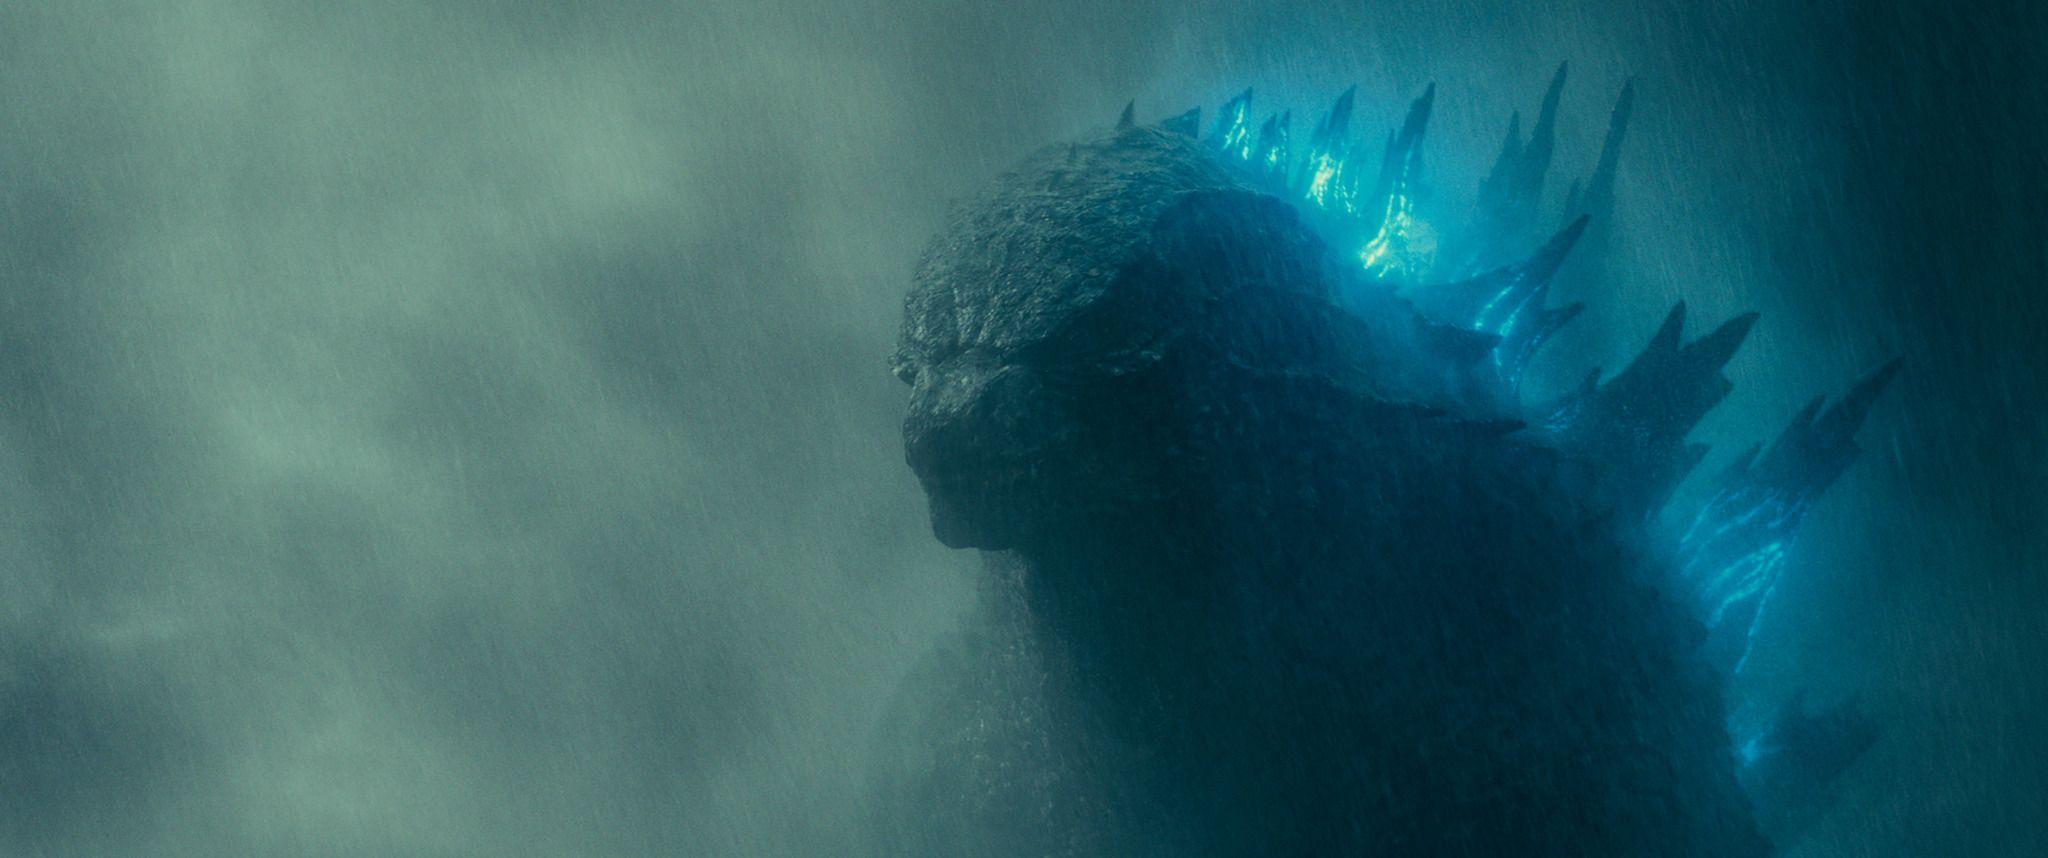 Godzilla King of the Monsters phone wallpaper 1080P 2k 4k Full HD  Wallpapers Backgrounds Free Download  Wallpaper Crafter